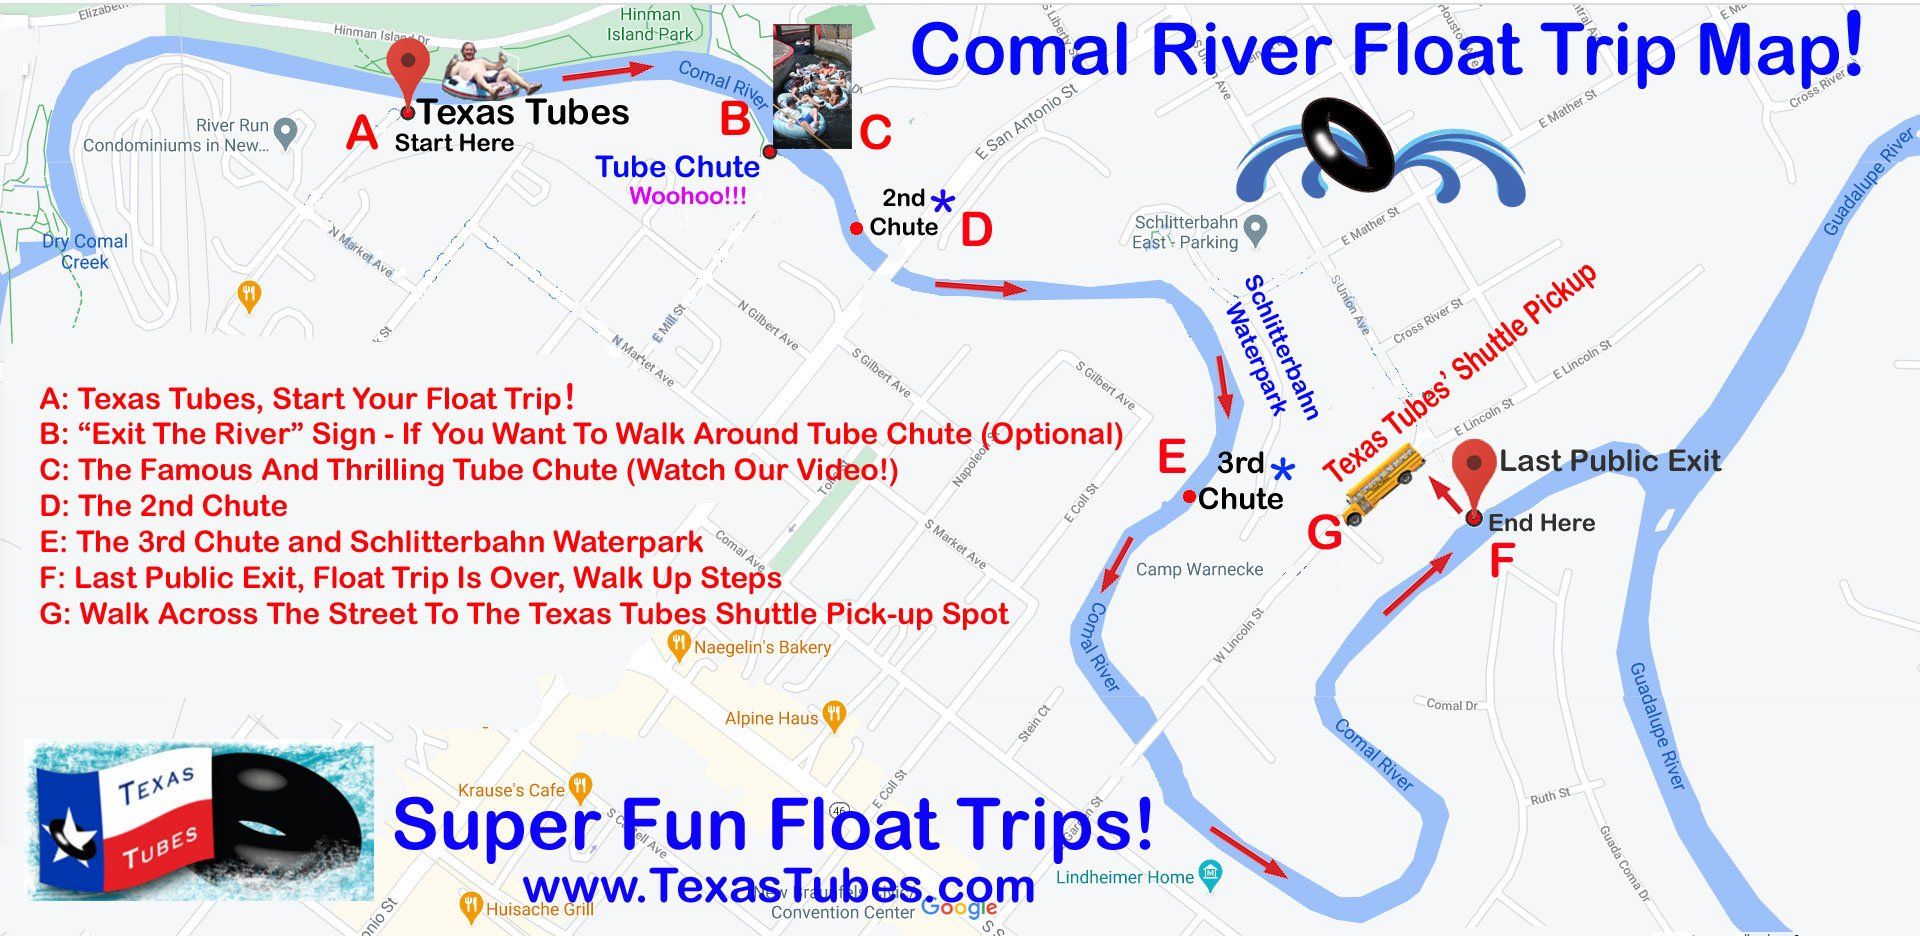 Comal River Float Trip Map with Texas Tubes - Float Trip Route around 2 hours long depending on river levels and if you stop to swim or picnic